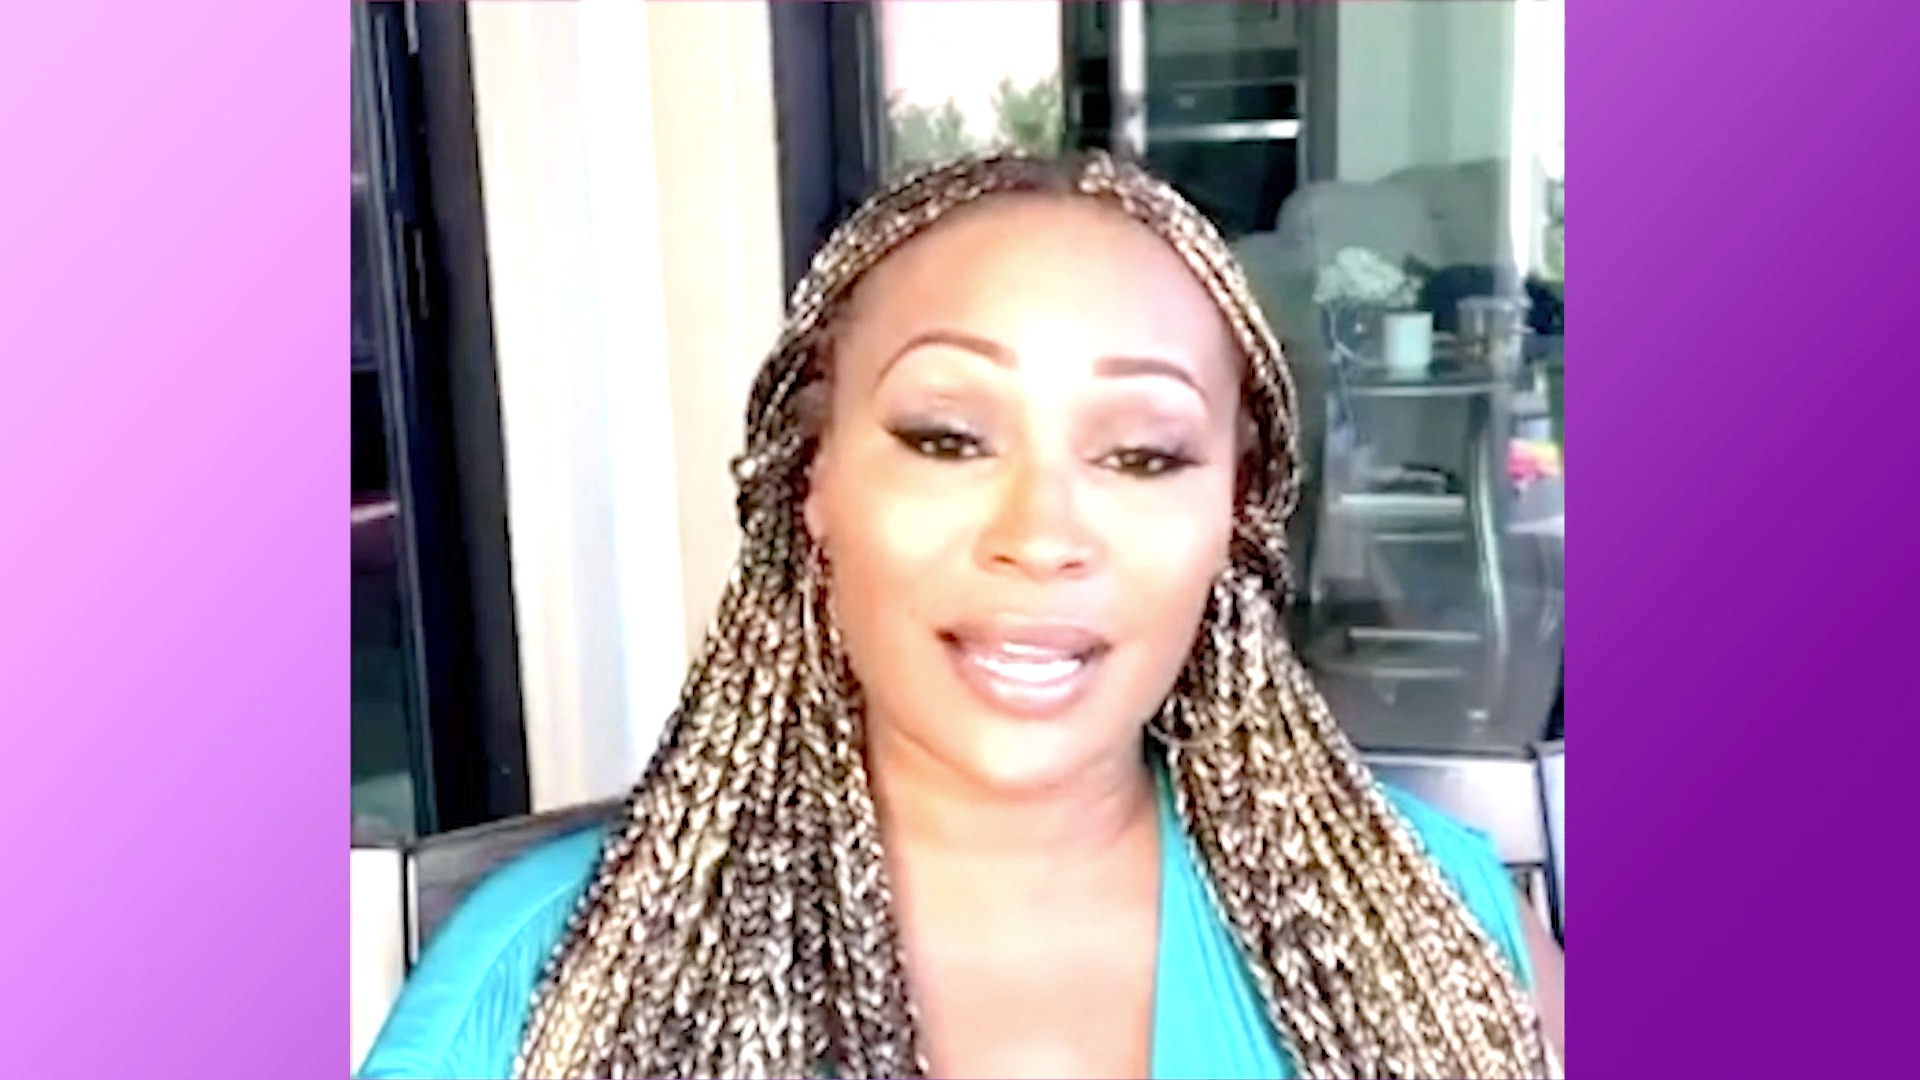 Cynthia Bailey on Worldwide Actions Against Racism: "The Whole World Is Coming Together"